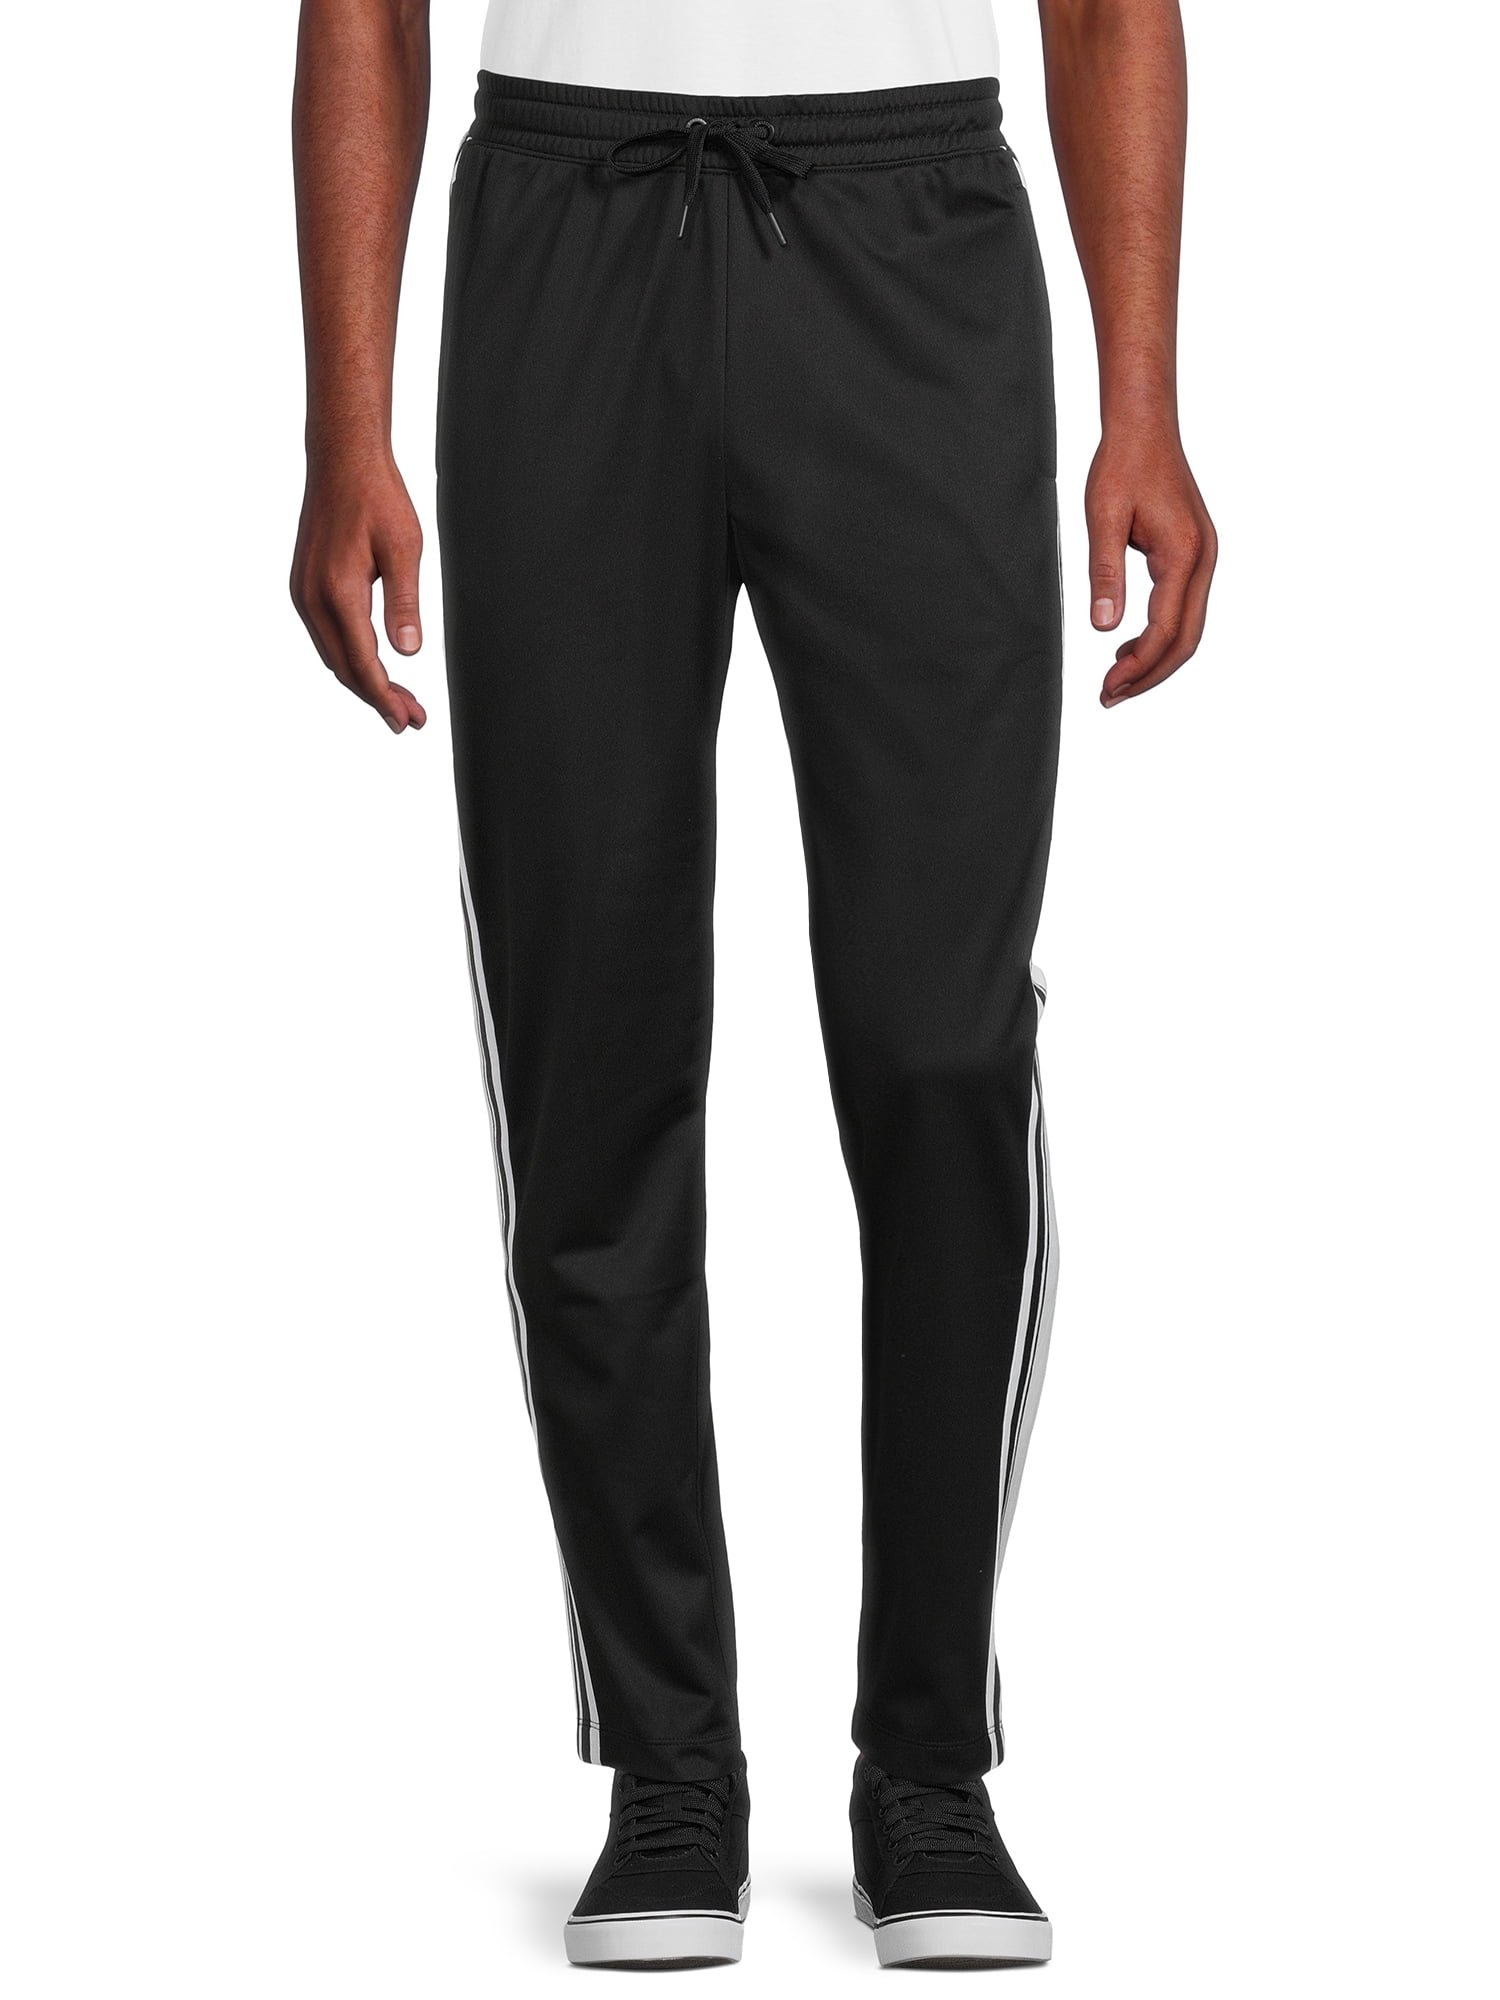 Athletic Works Men's and Big Men's Track Pants, Sizes S-3XL 